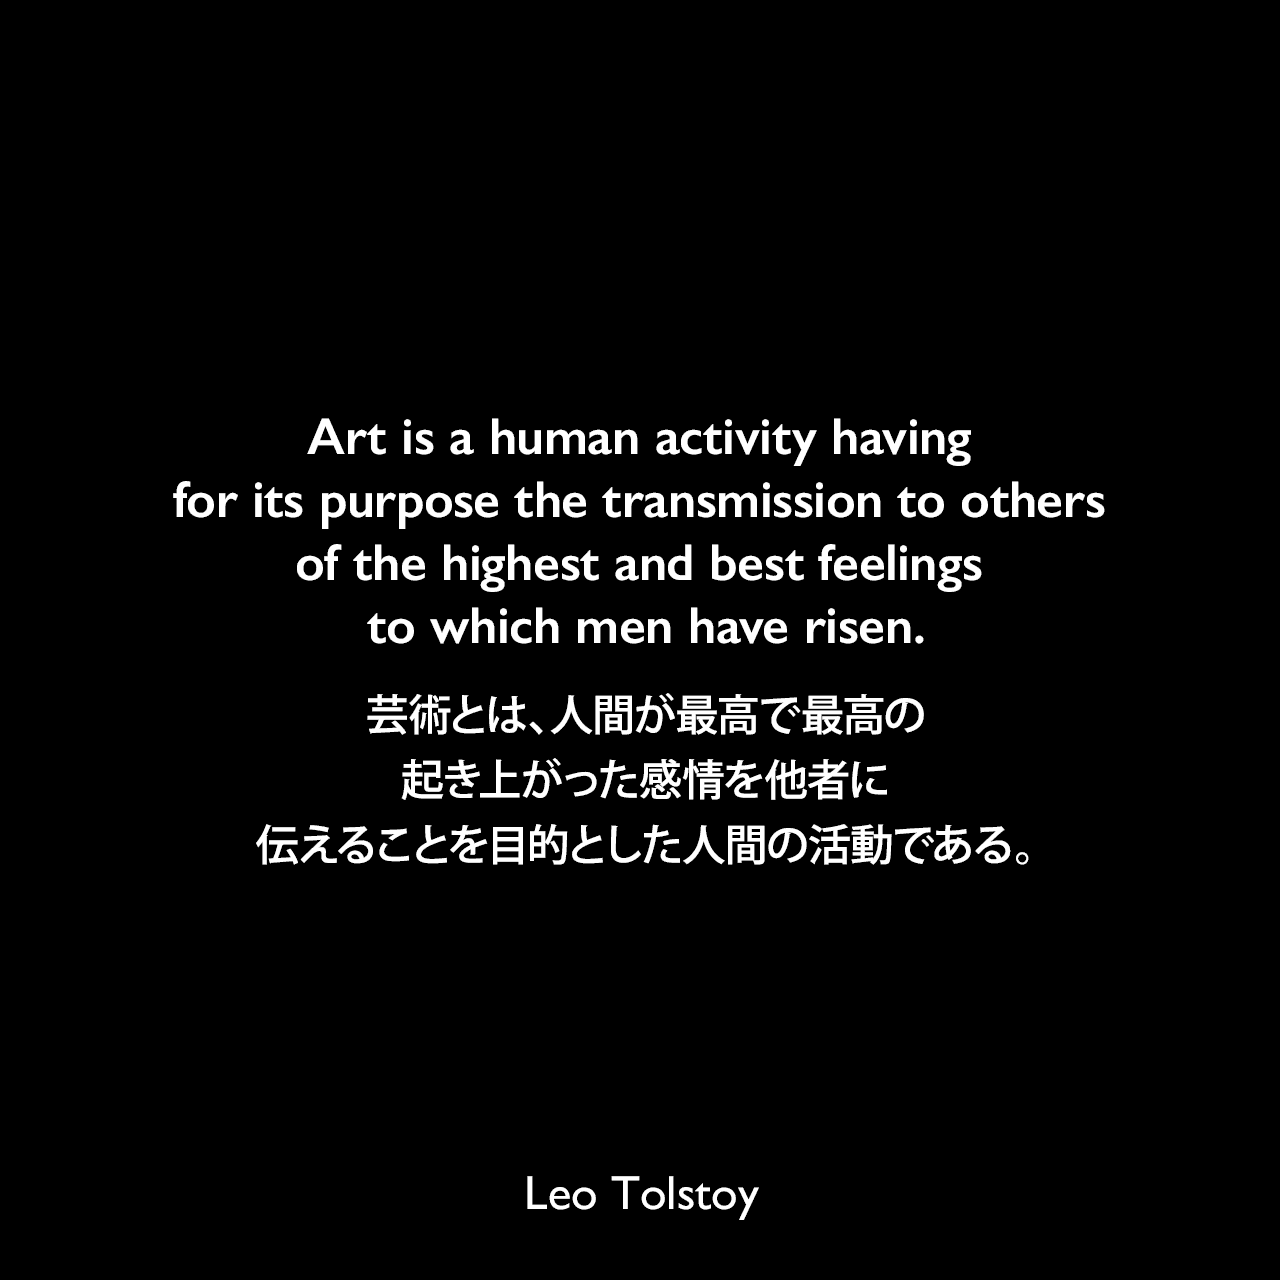 Art is a human activity having for its purpose the transmission to others of the highest and best feelings to which men have risen.芸術とは、人間が最高で最高の起き上がった感情を他者に伝えることを目的とした人間の活動である。- トルストイによる本「芸術とは何か」よりLeo Tolstoy